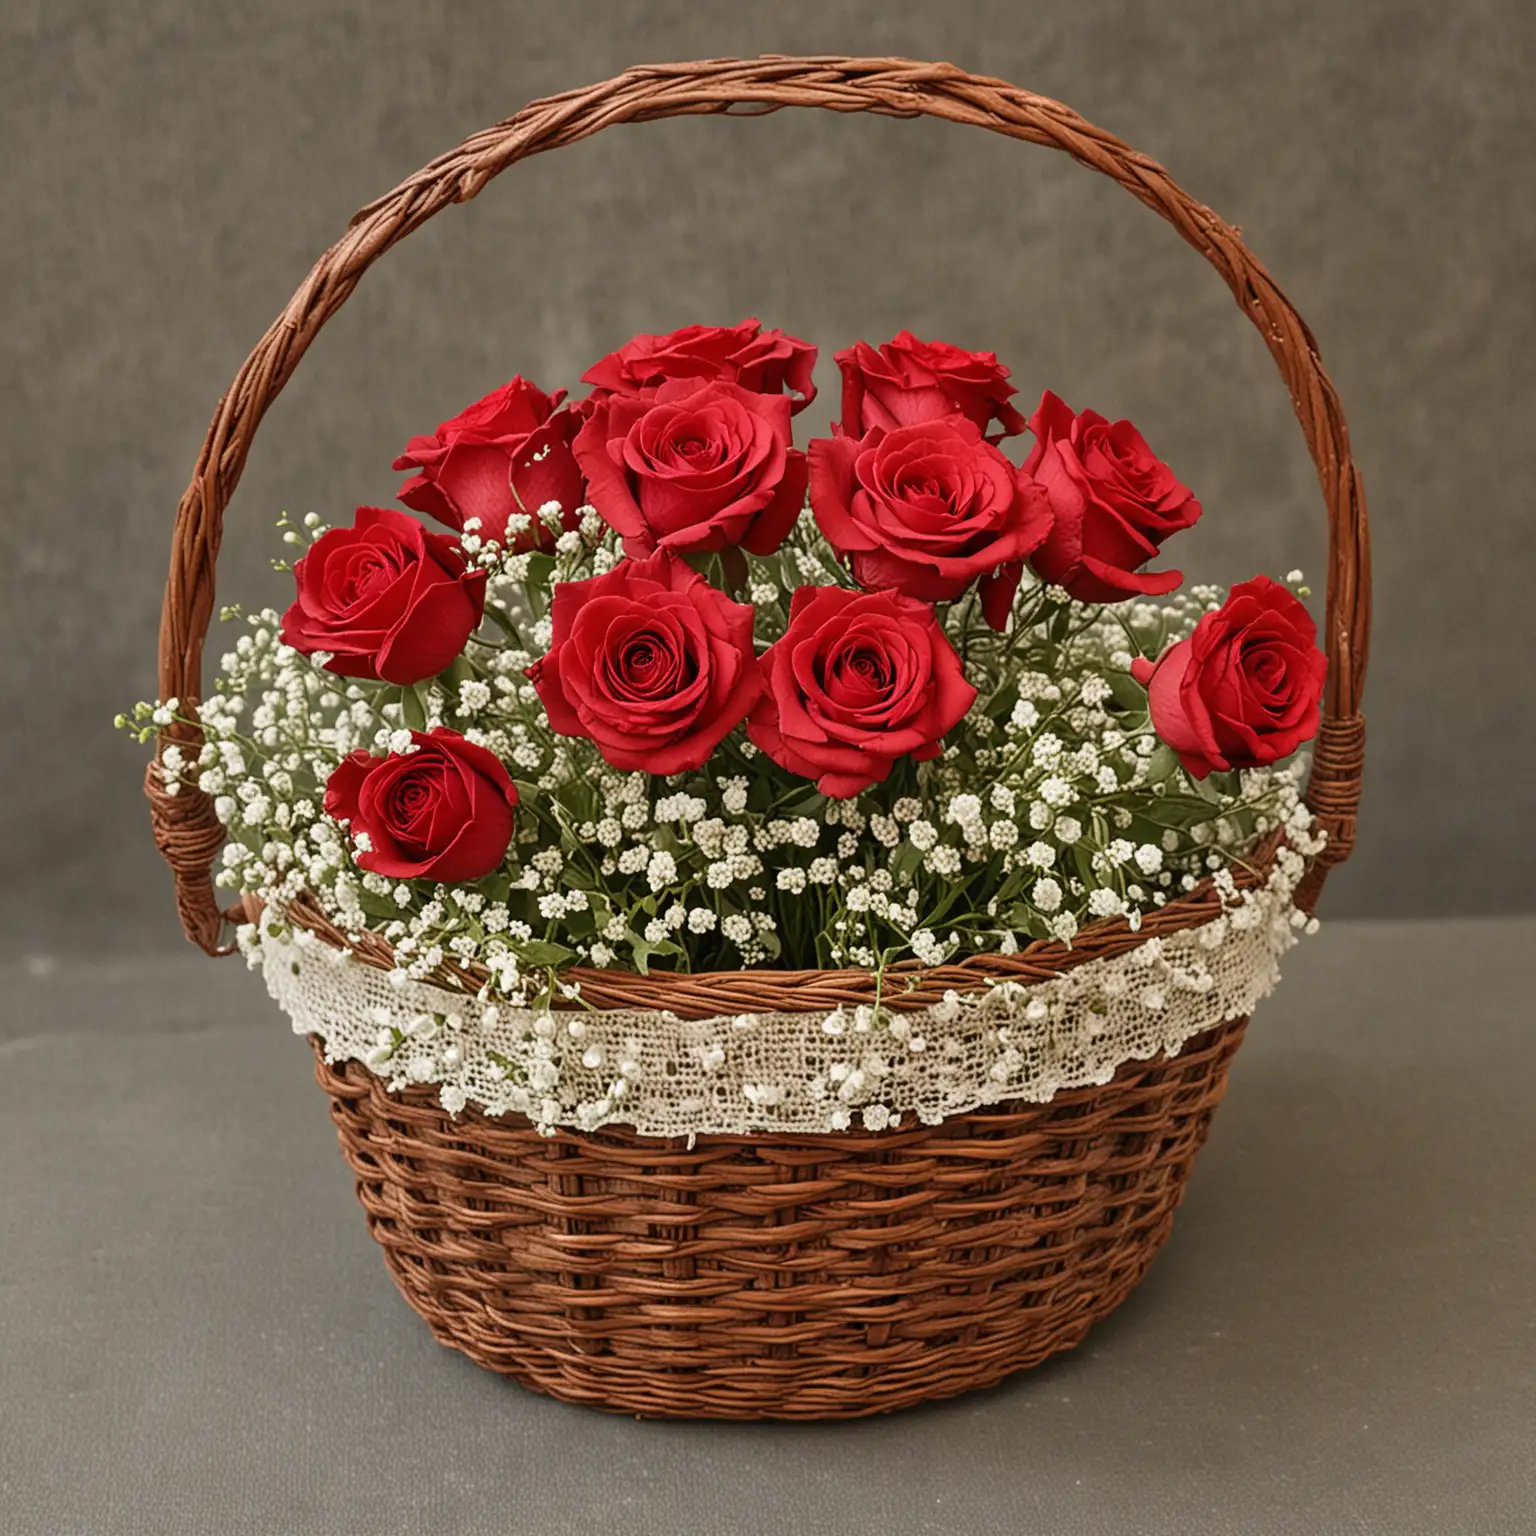 Rustic-Handwoven-Basket-with-Red-Roses-and-Babys-Breath